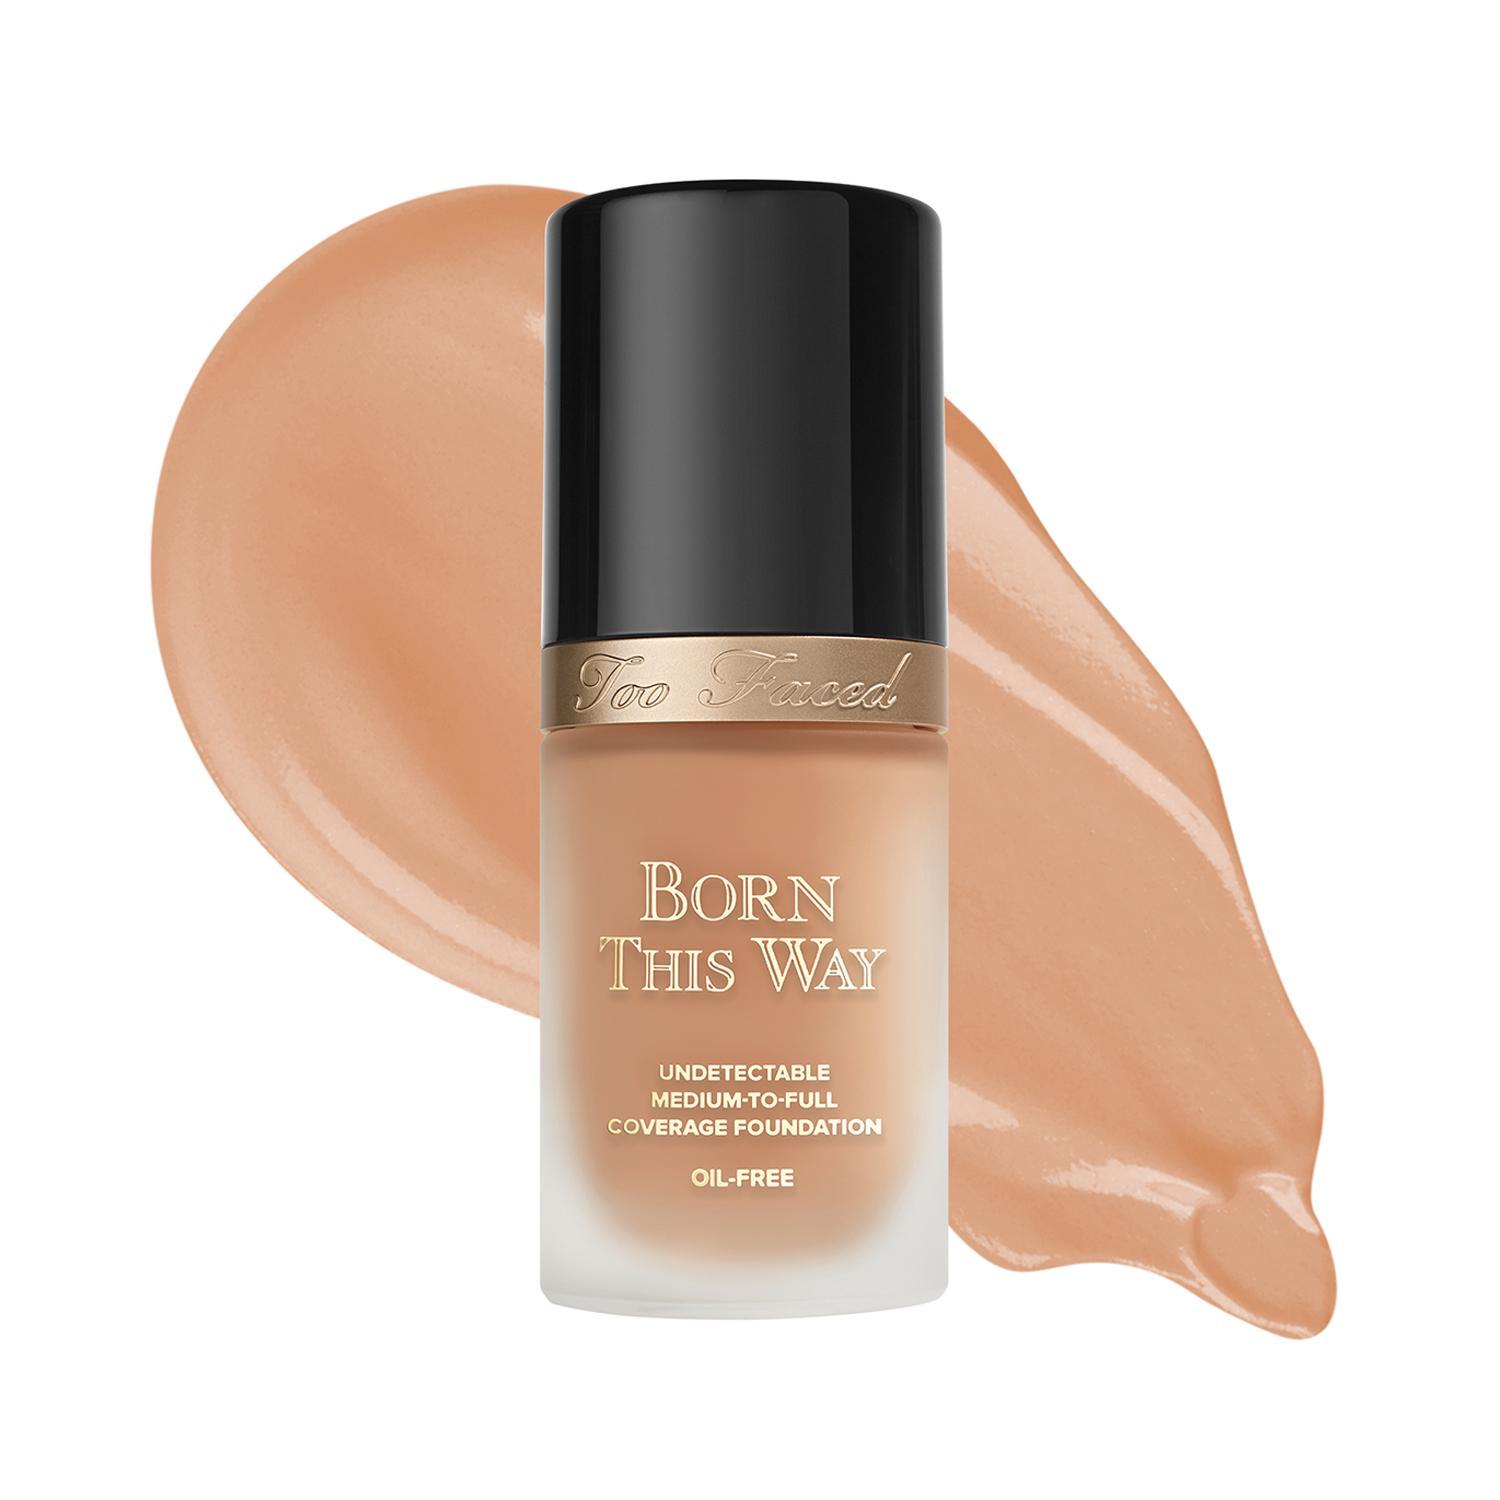 too faced born this way foundation - warm nude (30ml)